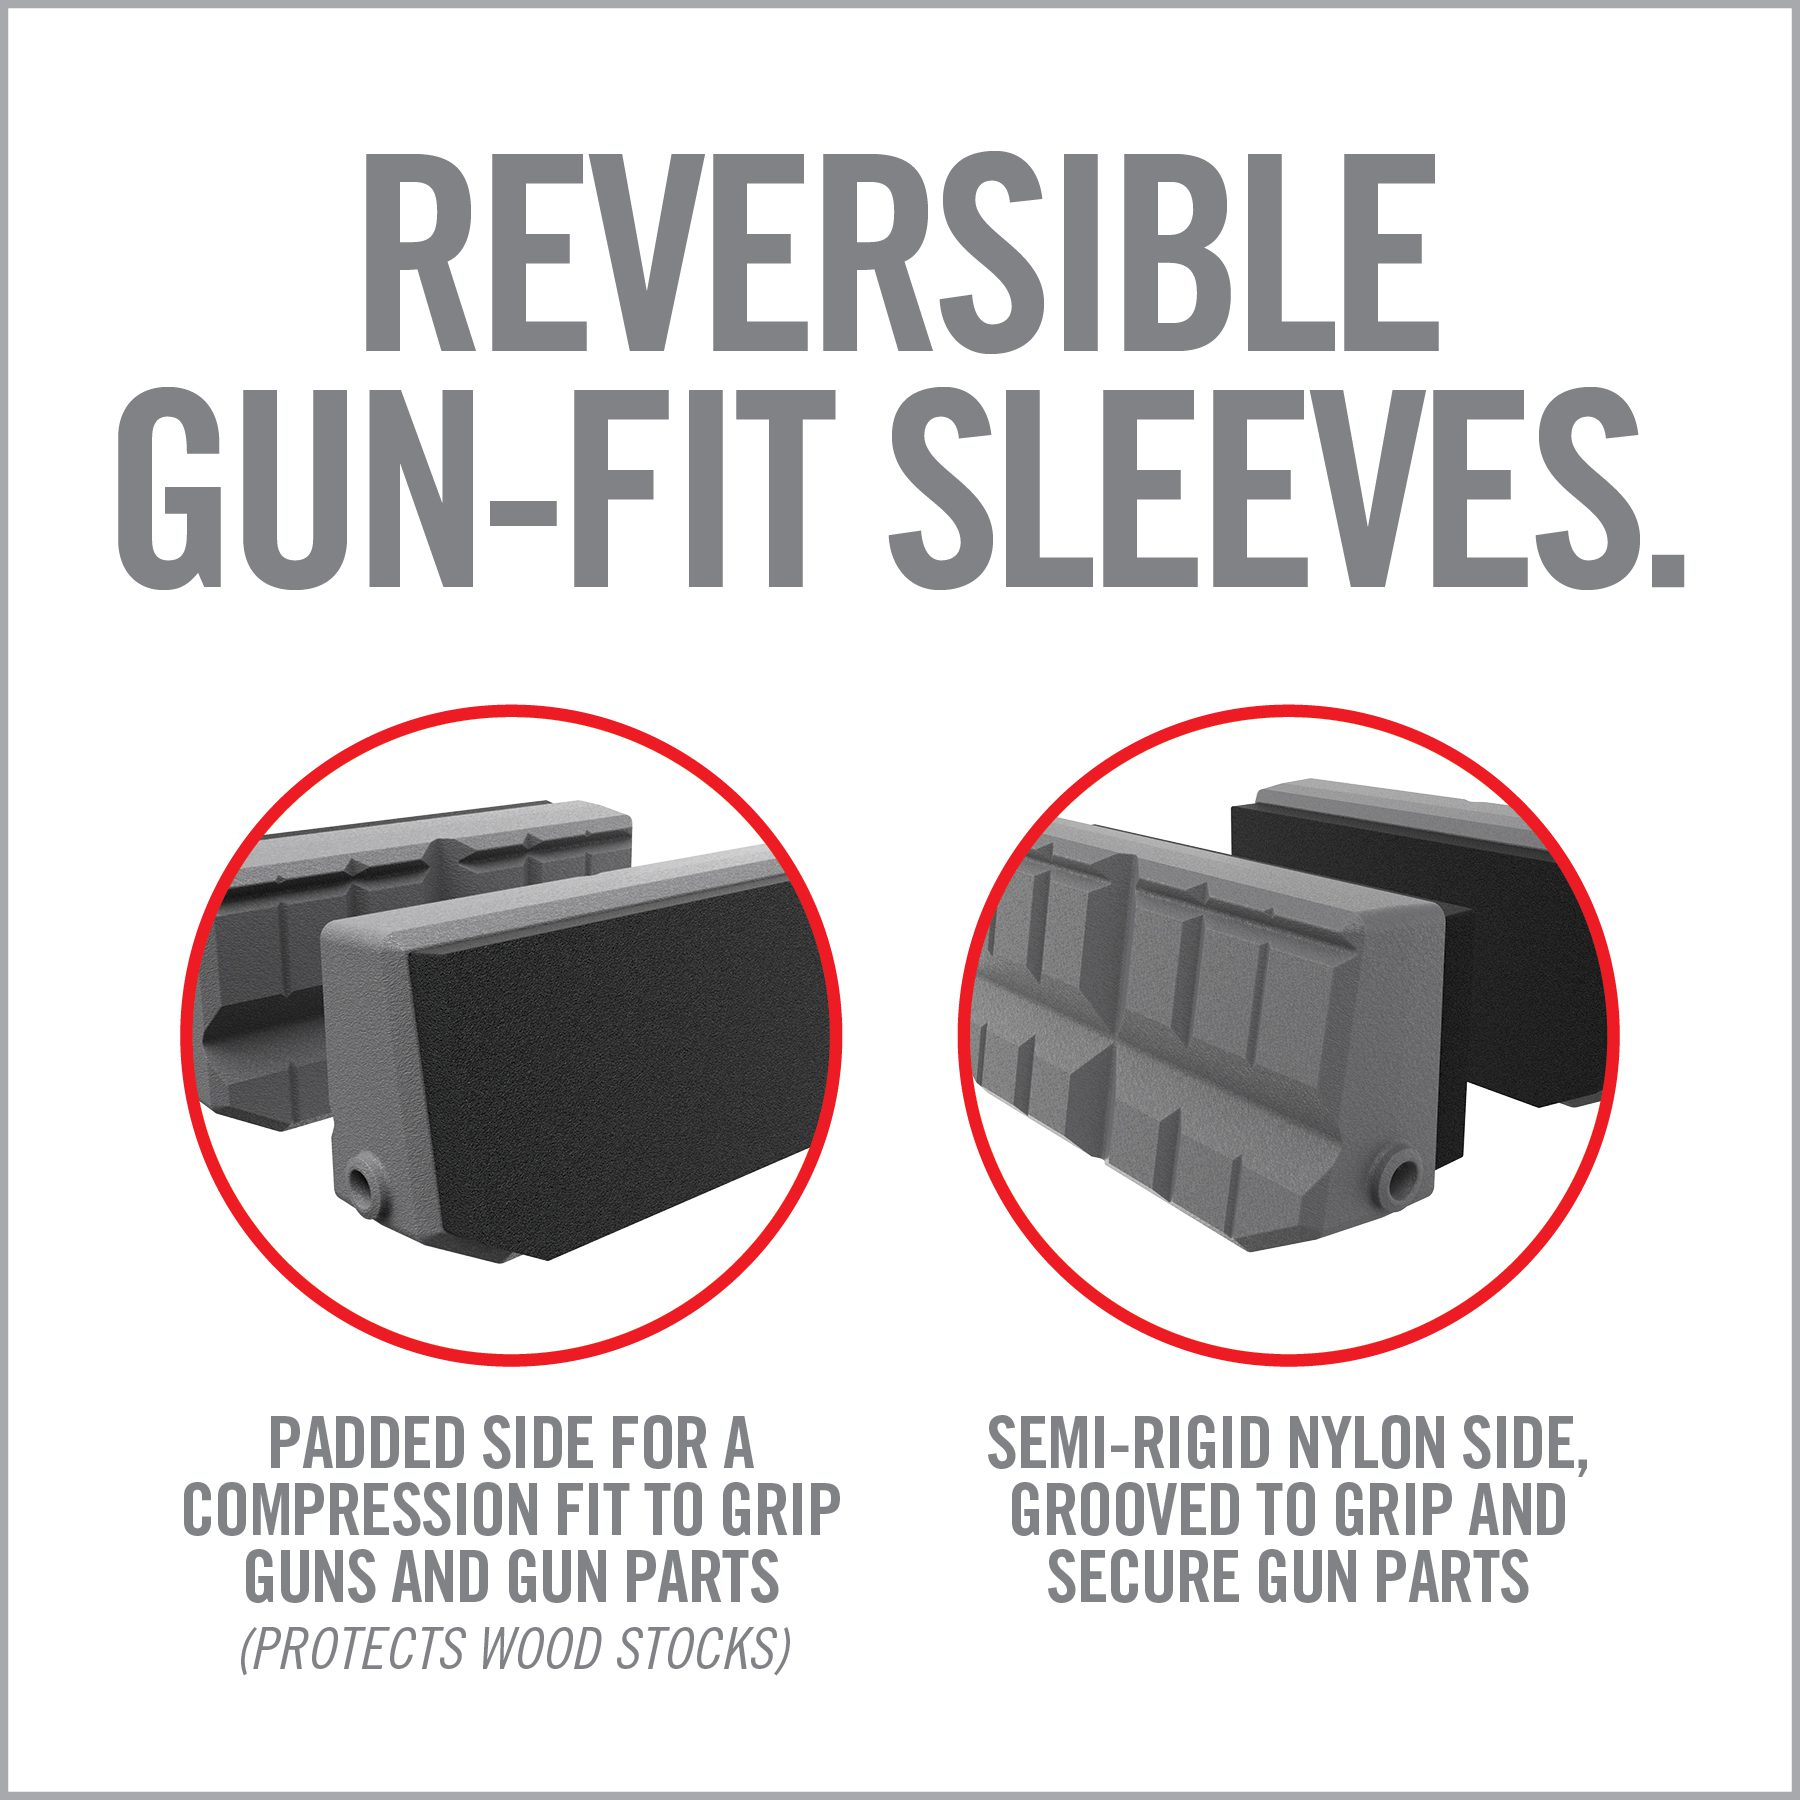 an ad for the reversible gun - fit sleeves